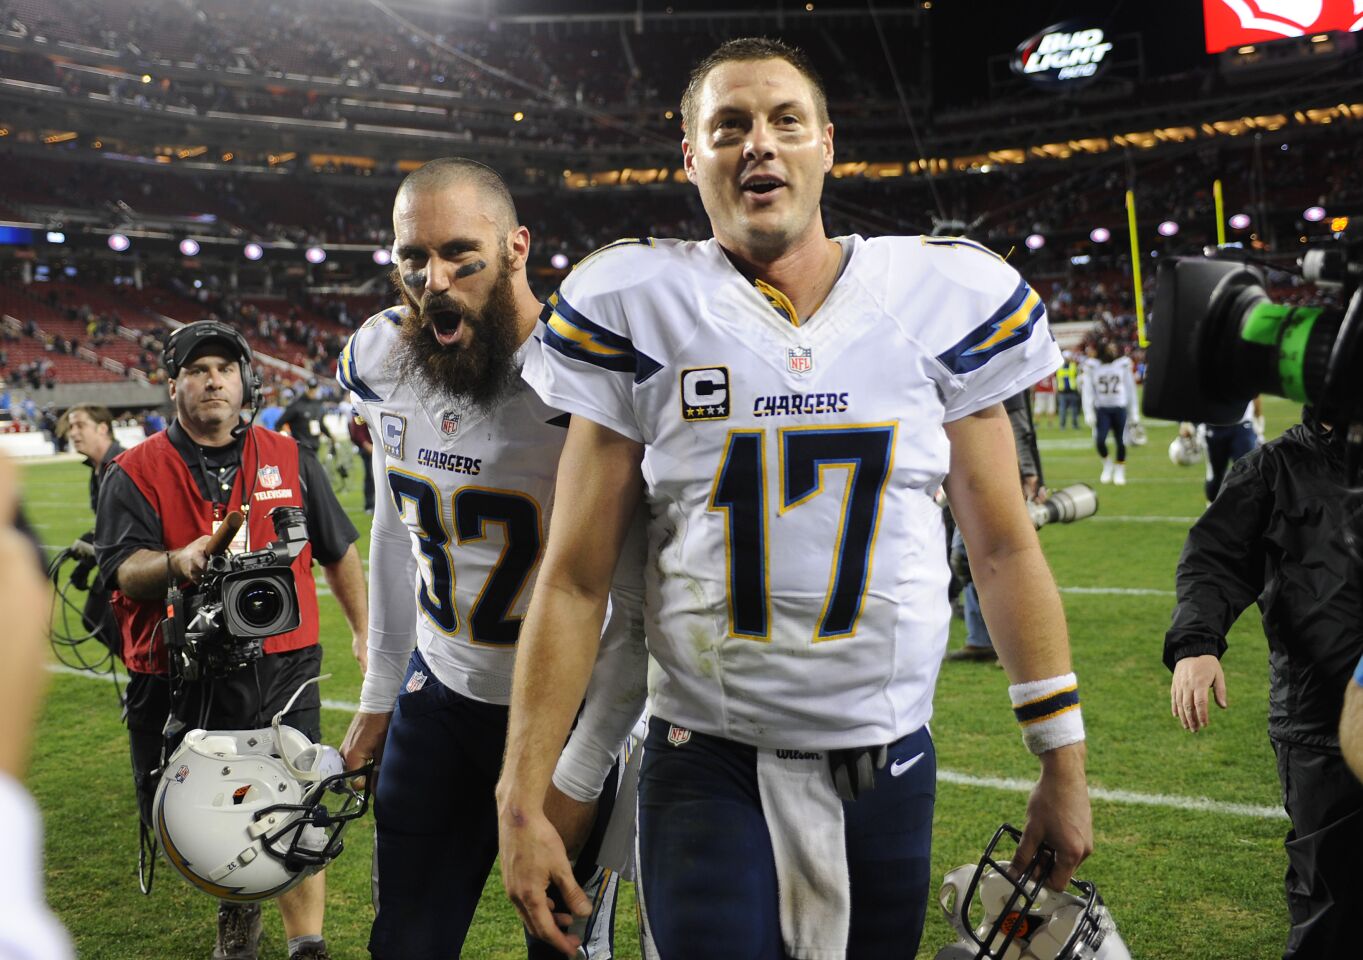 Chargers Eric Weddle and Philip Rivers celebrate win over 49ers in Santa Clara on Dec. 20, 2014.